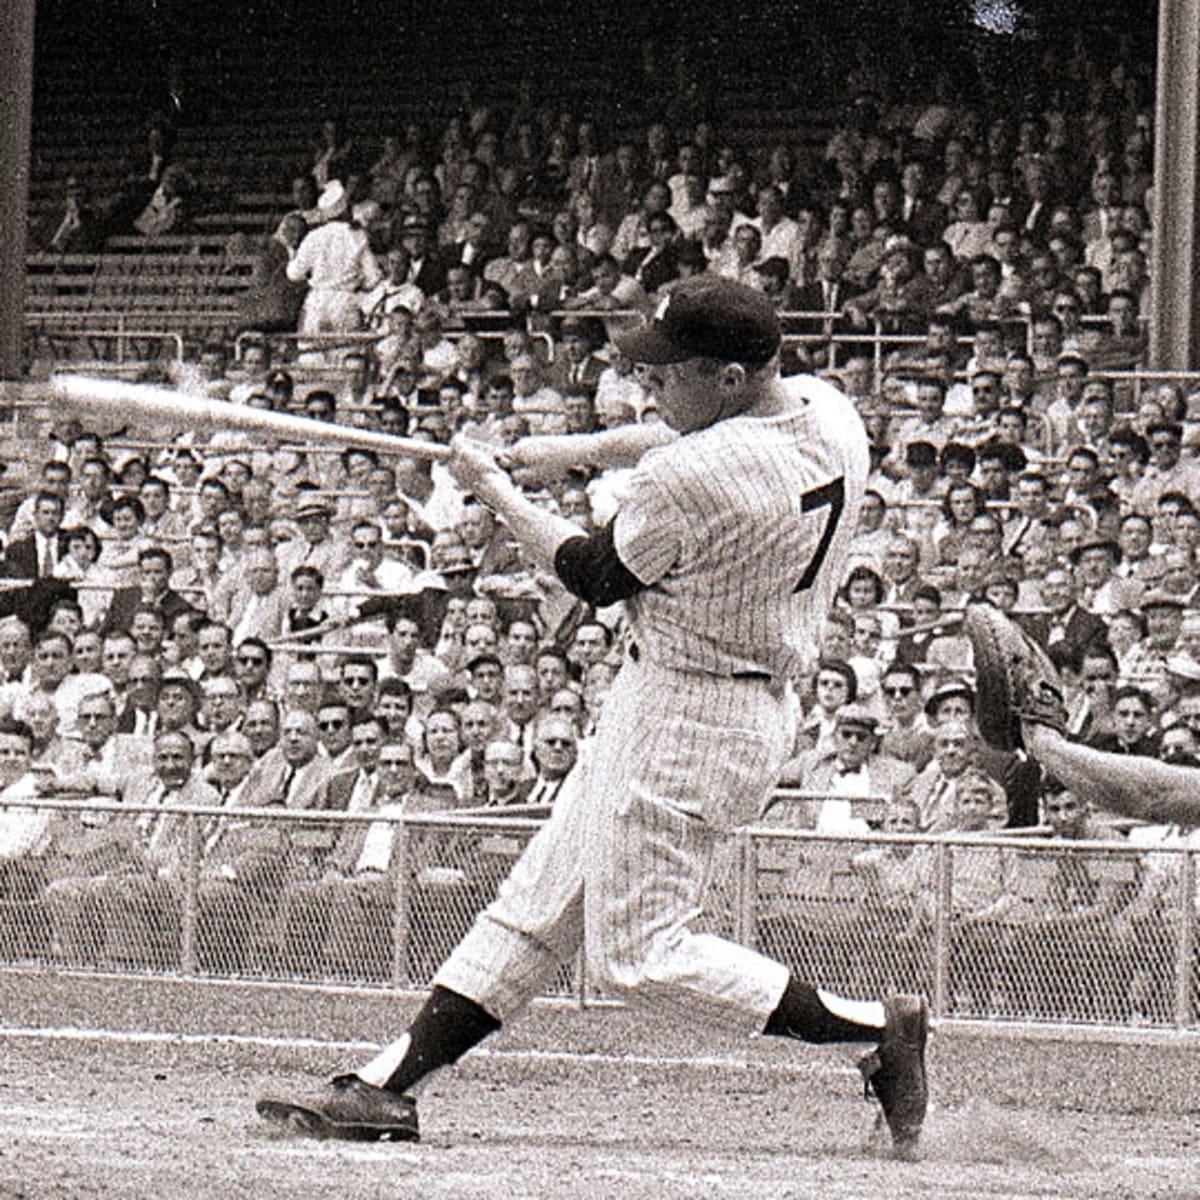 The Mantle Of The Babe: Mickey Mantle eyes Babe Ruth's home run record -  Sports Illustrated